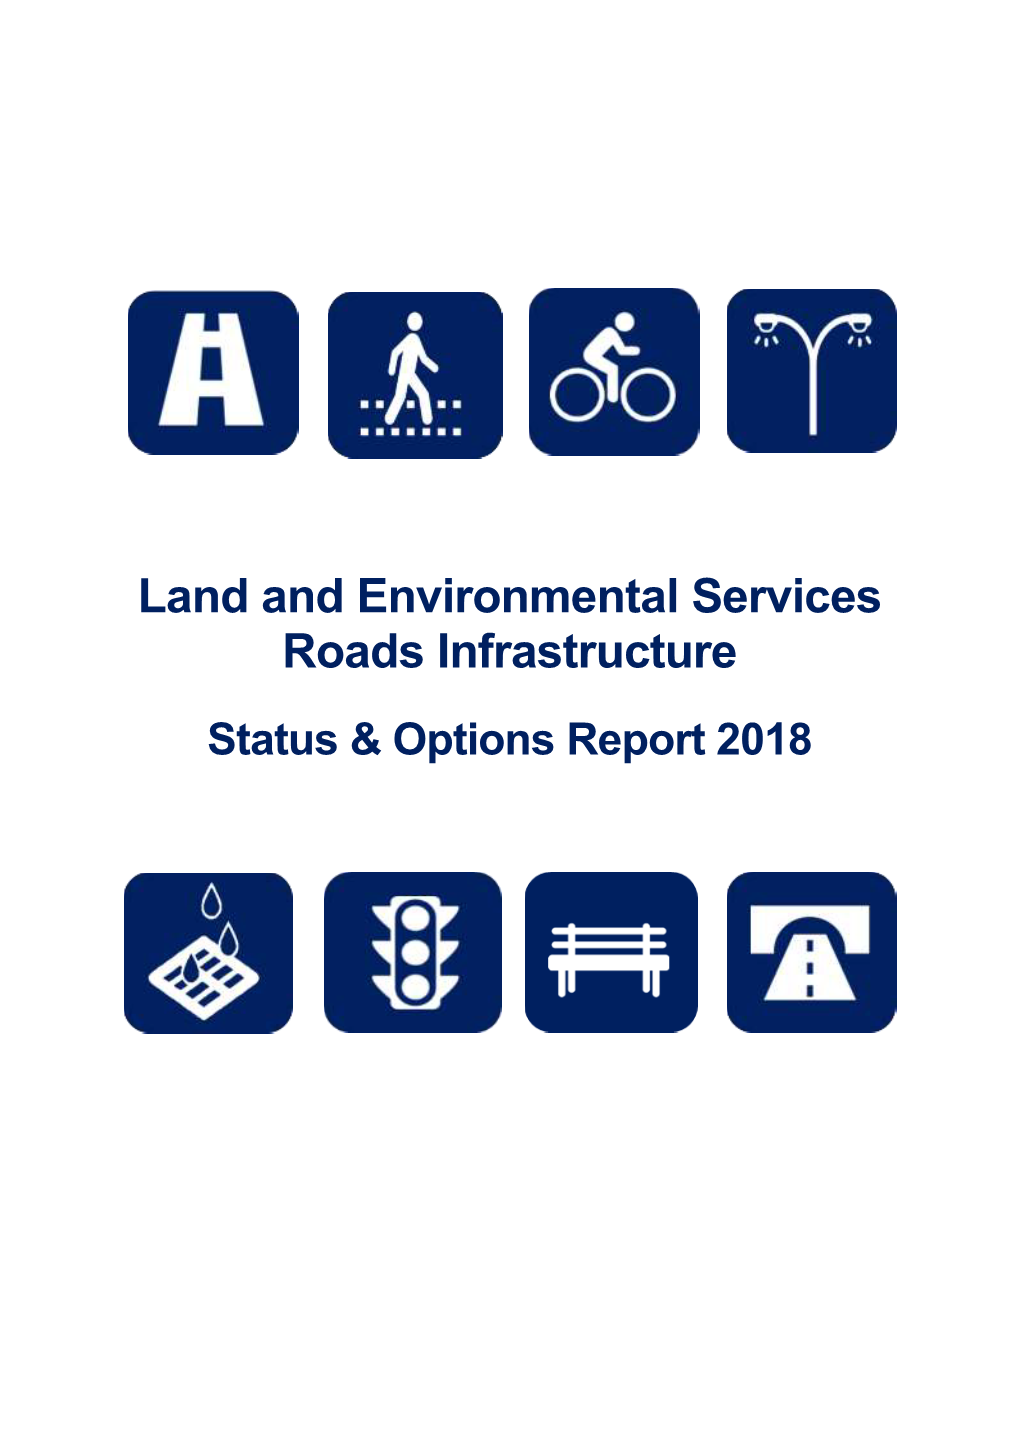 Land and Environmental Services Roads Infrastructure